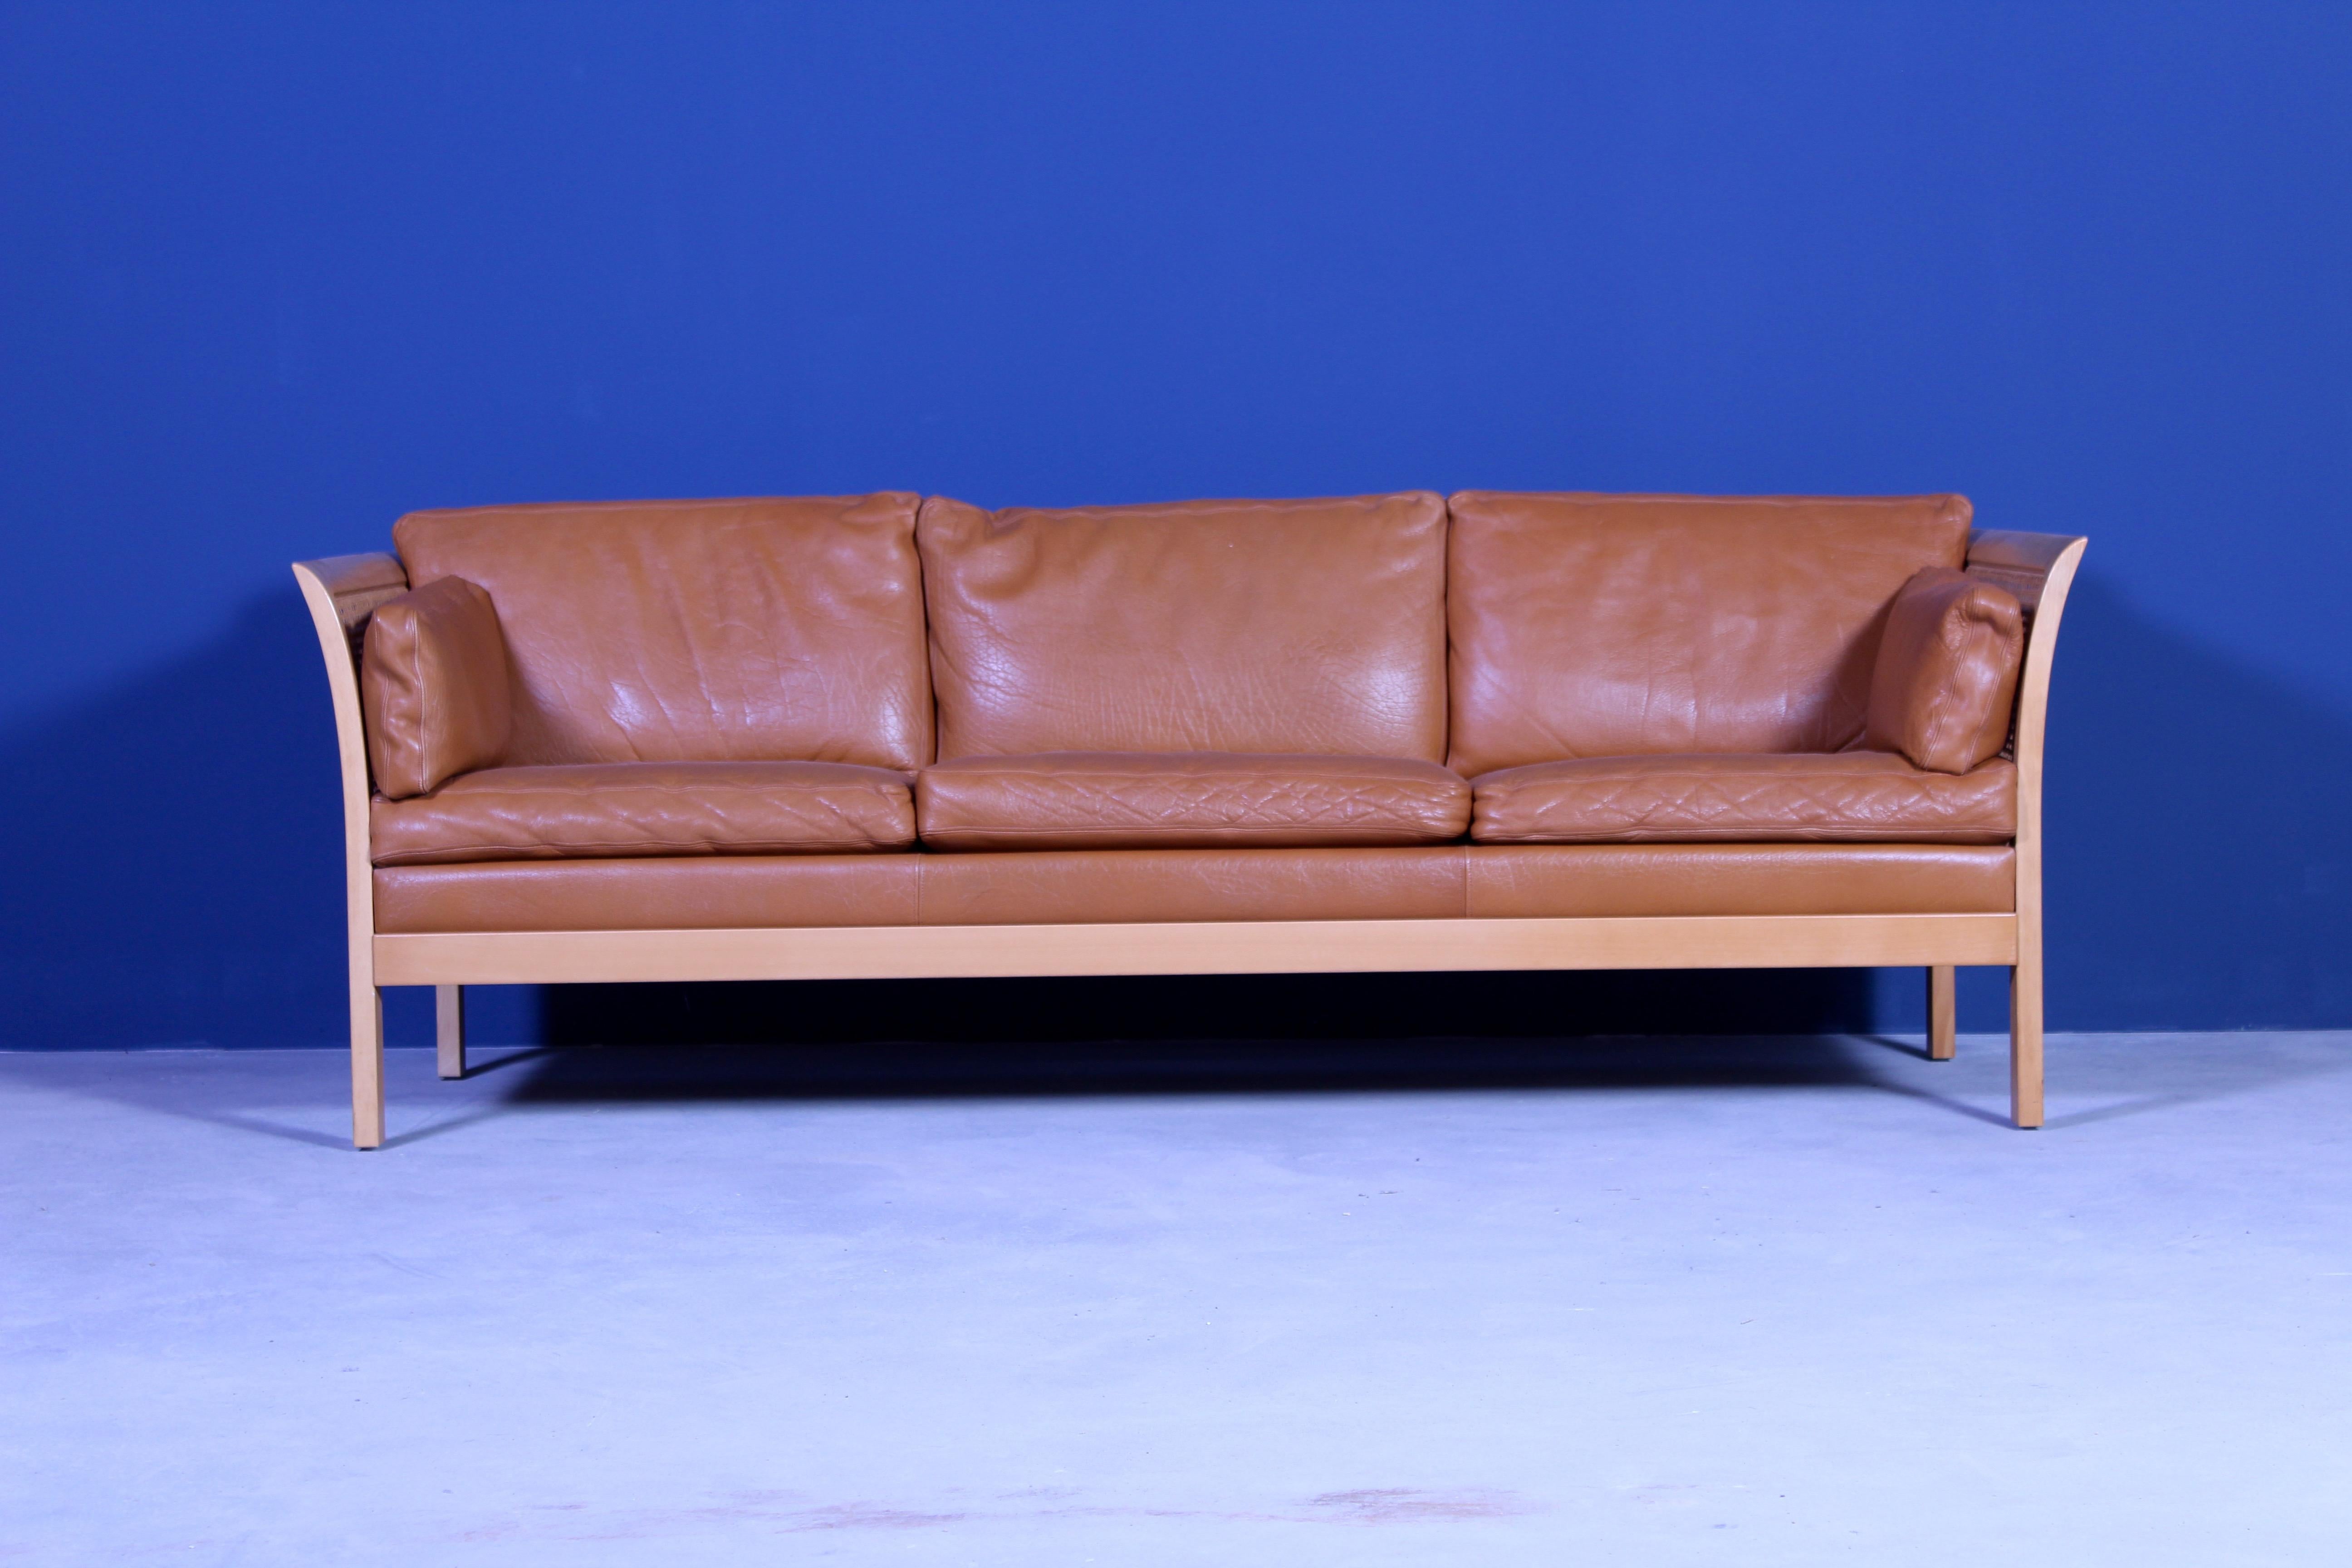 Two midcentury Swedish sofas designed by Swedish designer Arne Norell. The sofa’s has a beach frame with rattan inlays and original cognac colored leather upholstery. 2 available.

Very good vintage condition with only minor signs of usage and